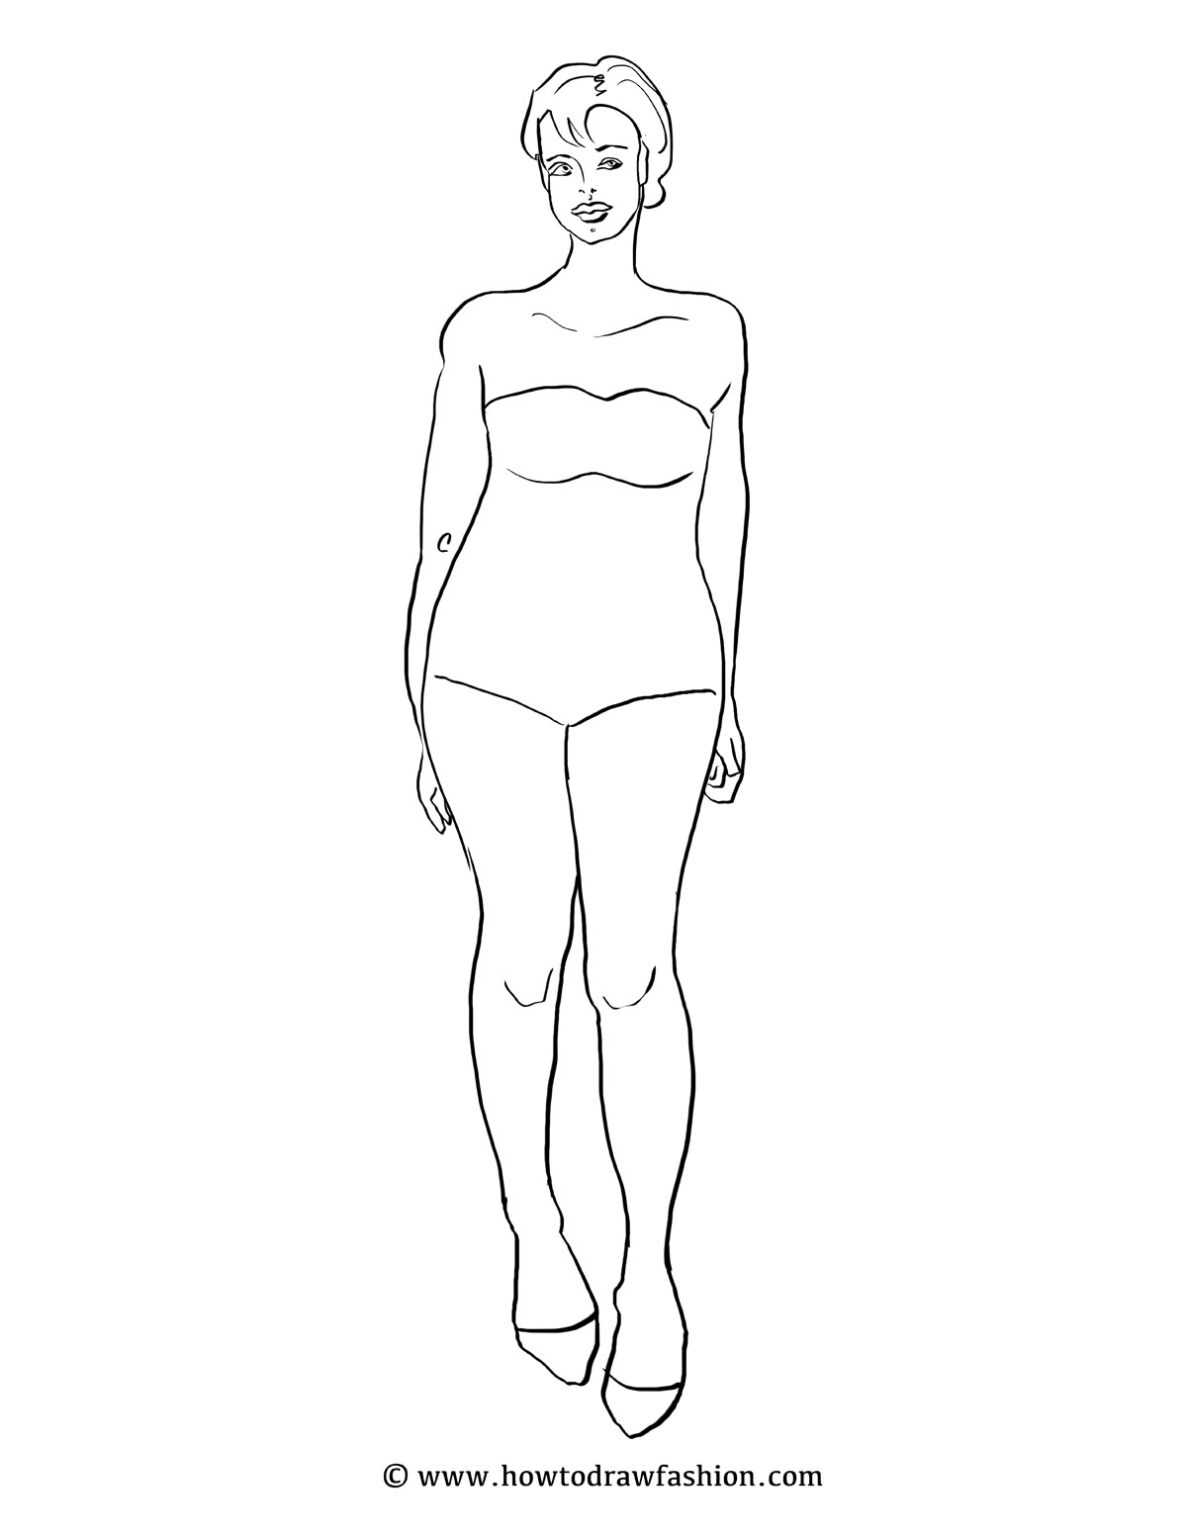 Human Body Drawing Template At Getdrawings | Free For with Blank Model